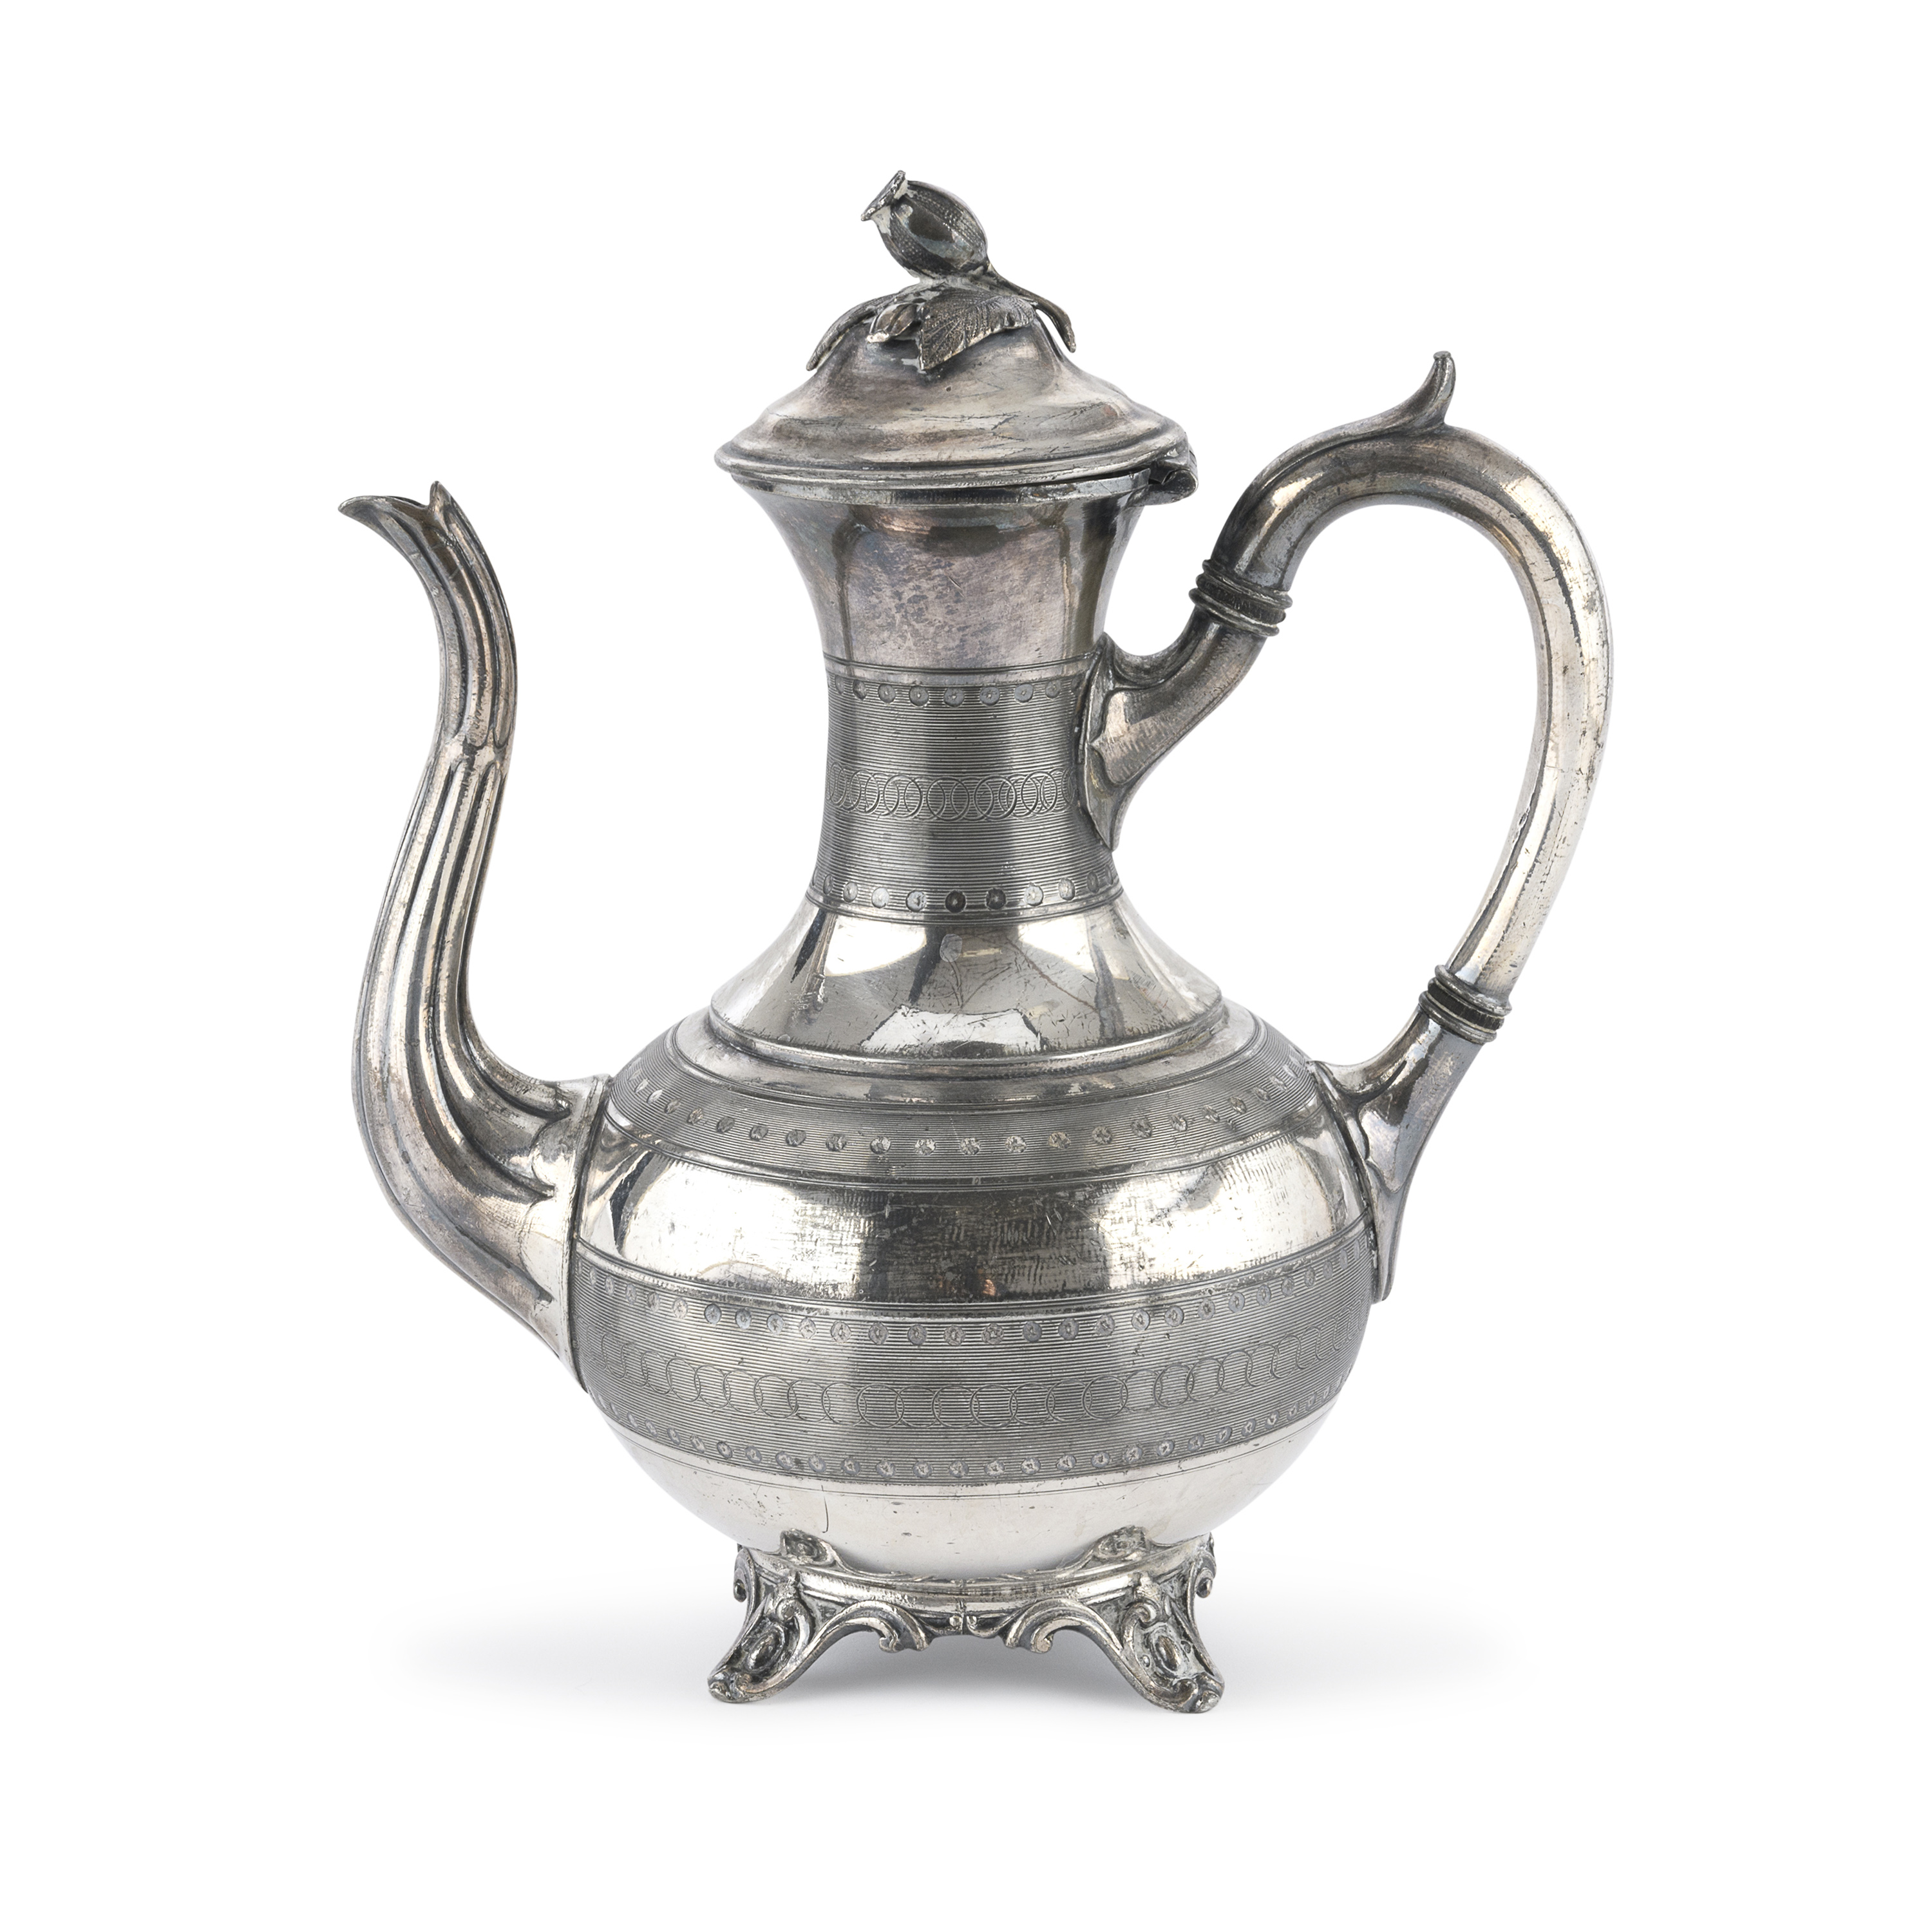 SILVER-PLATED PEWTER TEAPOT ENGLAND LATE 19TH CENTURY